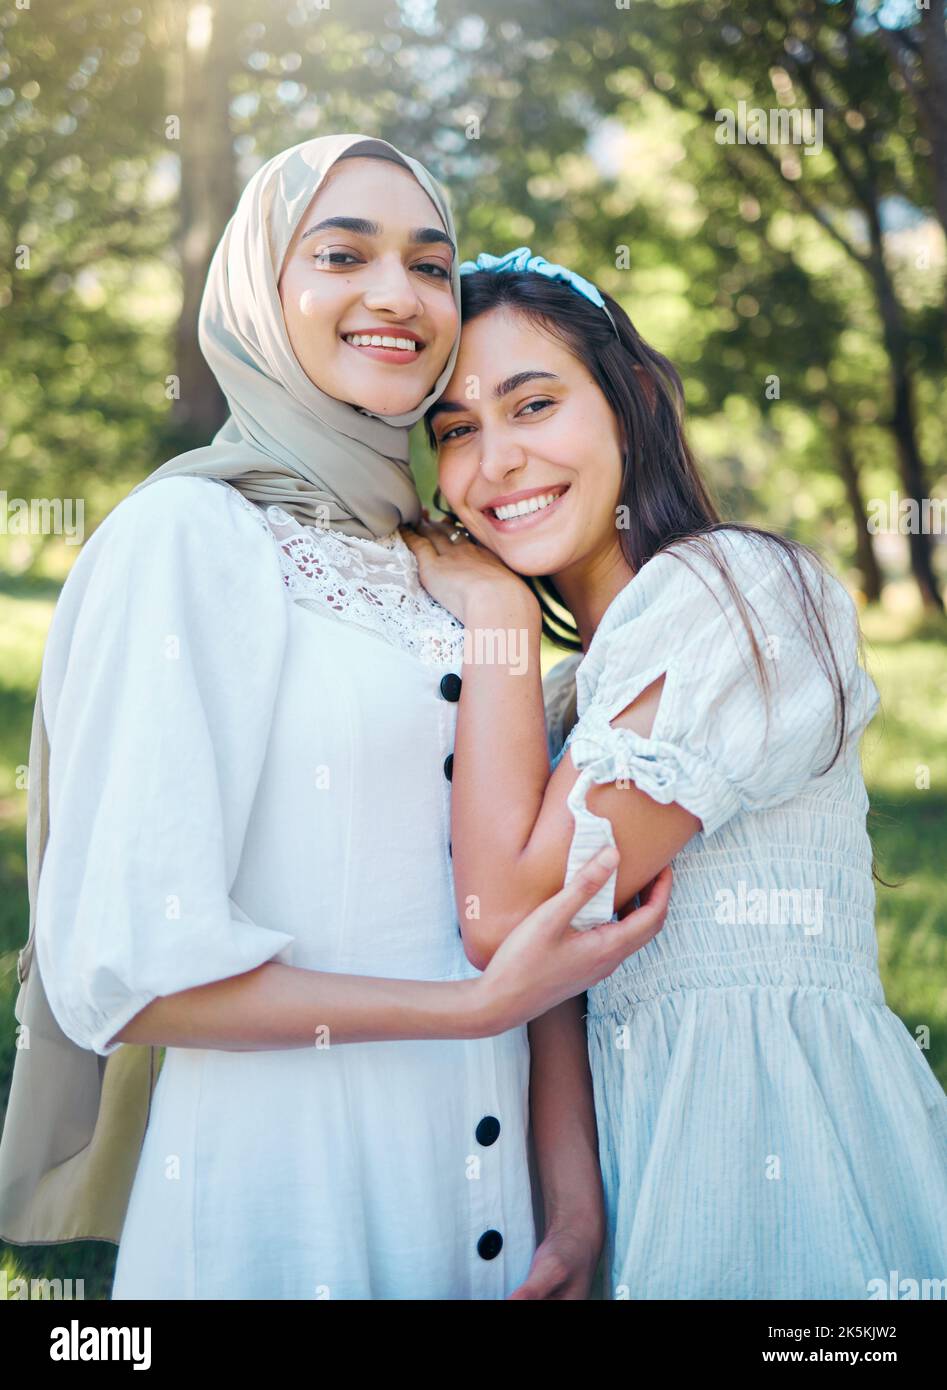 Women happy in garden, forest park with trees and outdoor garden picnic in multicultural summer fashion. Portrait of female friends together, muslim Stock Photo